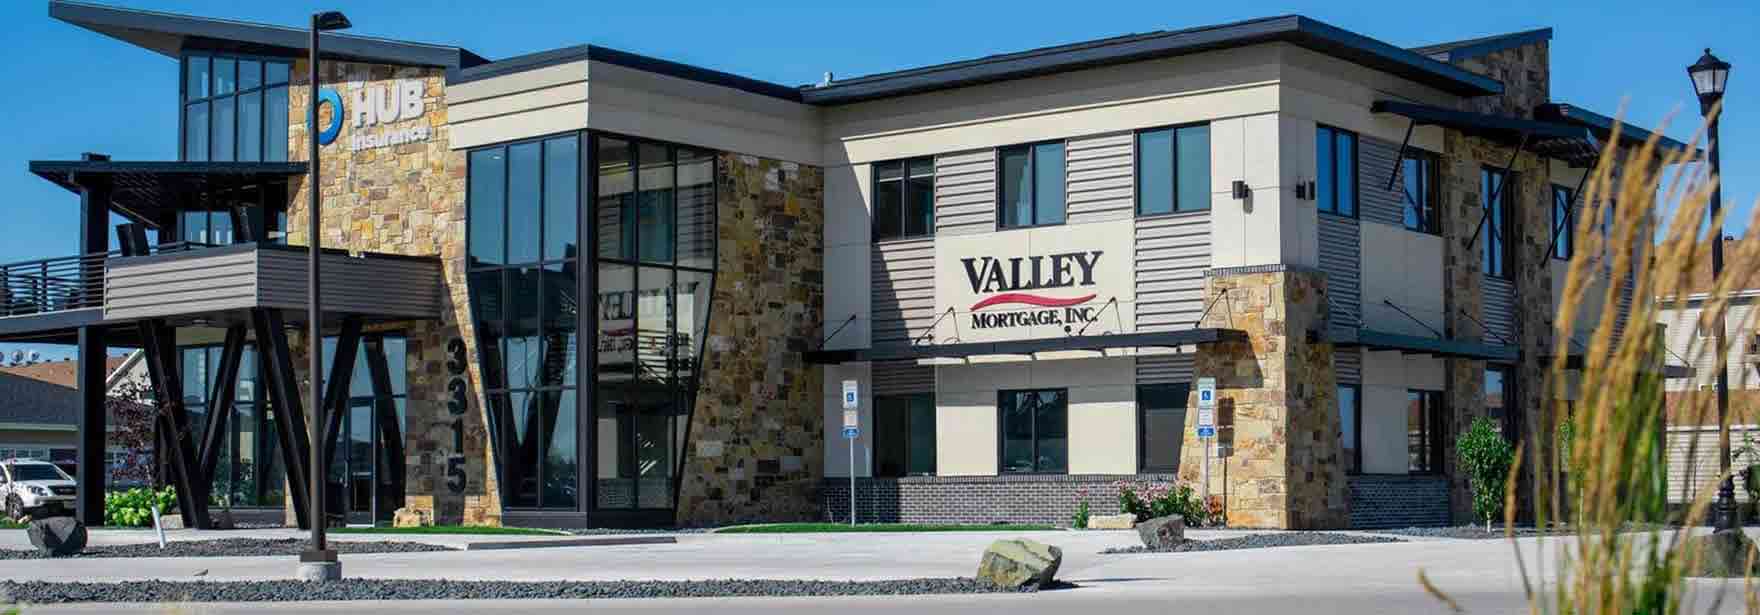 Valley Mortgage Inc. provides mortgage services in the Fargo-Moorhead, and surrounding communities.